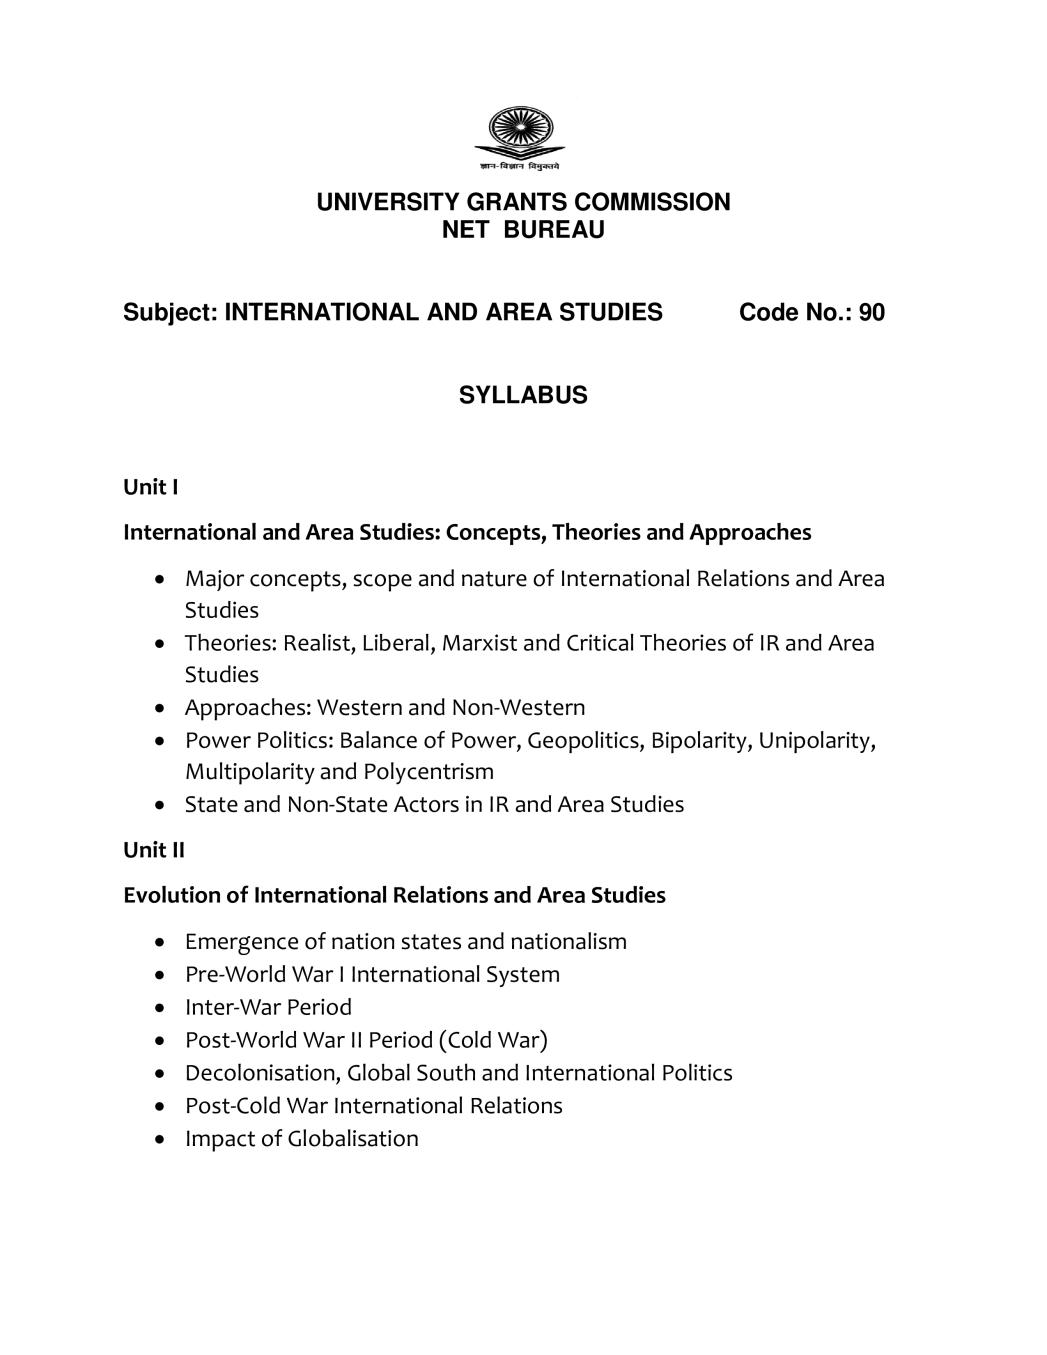 UGC NET Syllabus for International and Area Studies 2020 - Page 1